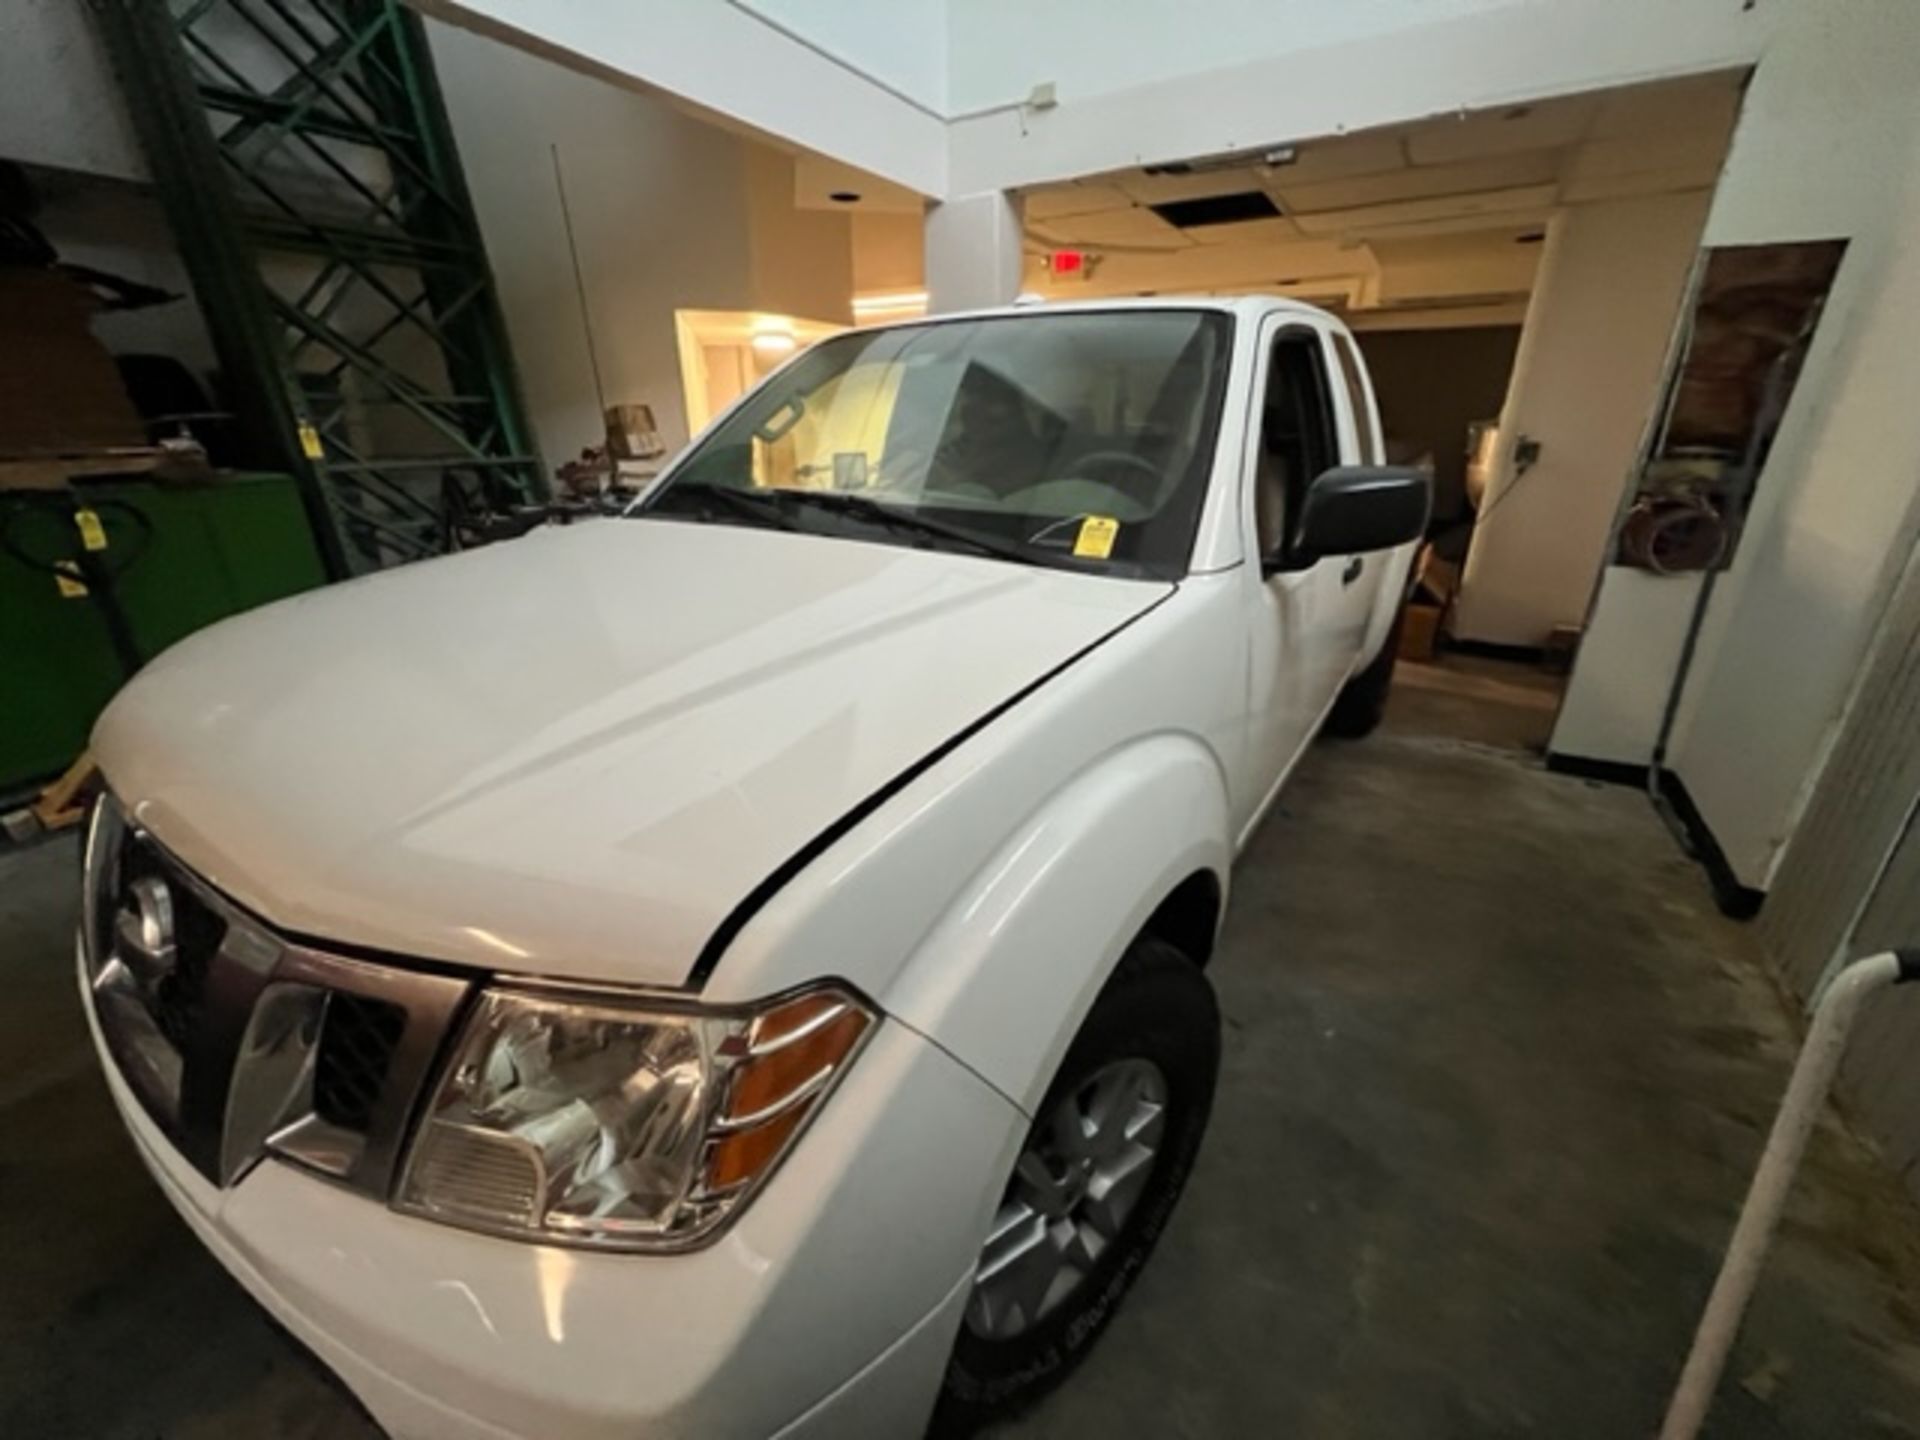 2015 NISSAN FRONTIER PICKUP TRUCK - VIN #1N6AD0CU5FN72560 - WHITE - AUTOMATIC TRANSMISSION - AIR CON - Image 2 of 15